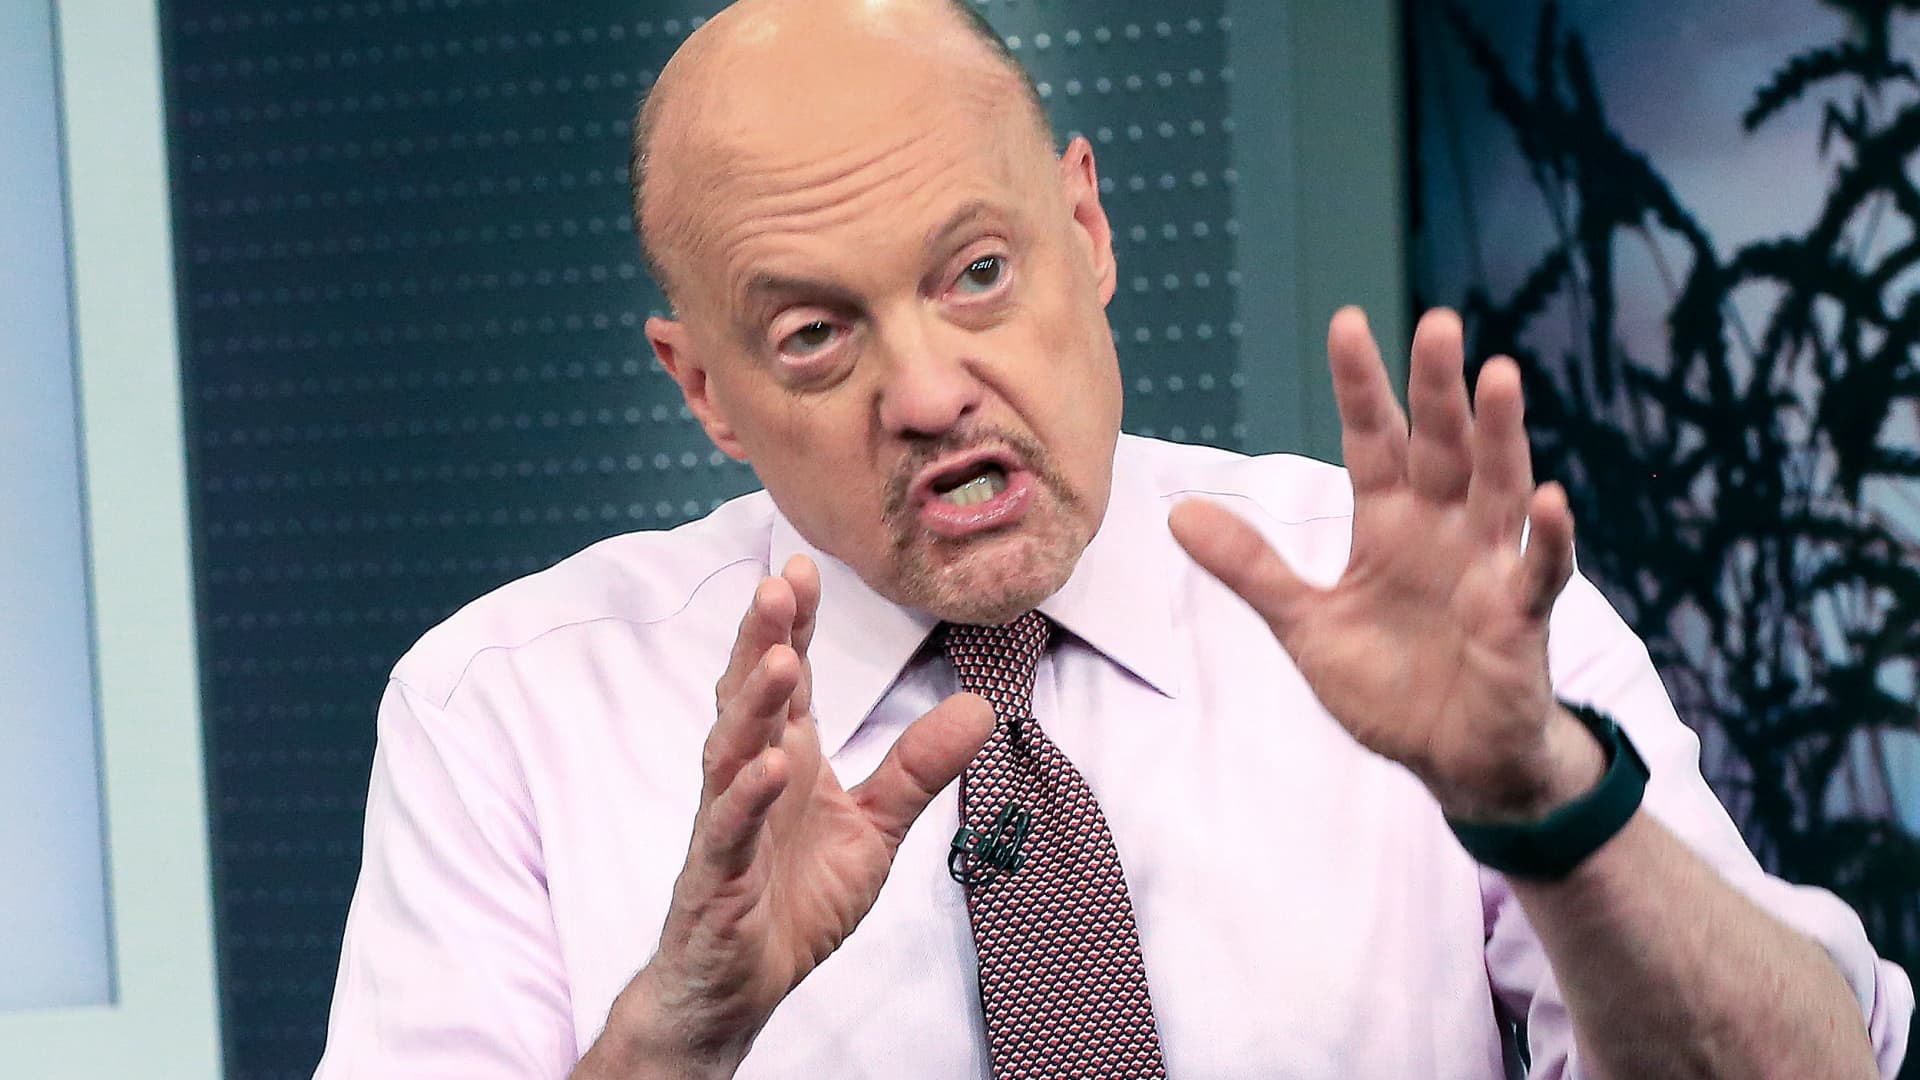 Hold off on buying stocks until the market slows down, Jim Cramer cautions